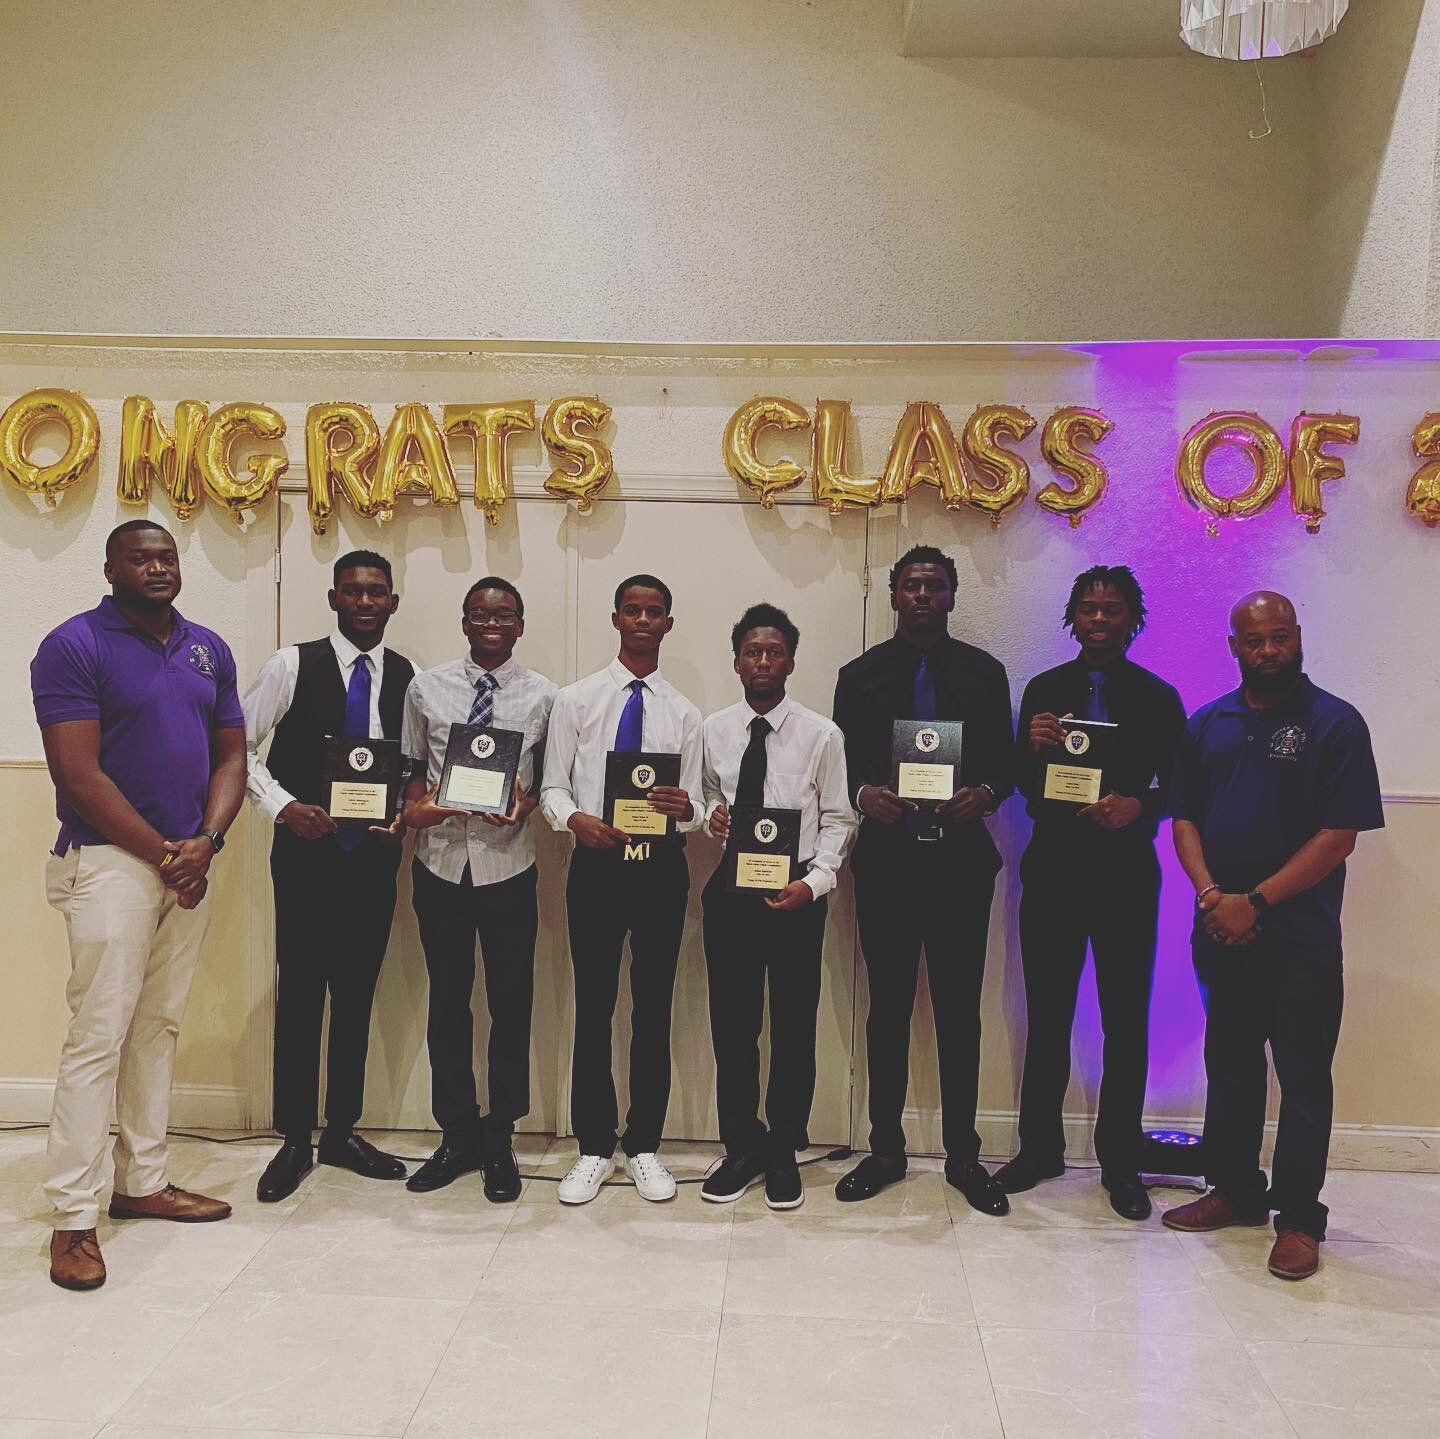 On Monday June 14, the Sigma Alpha chapter of Omega Psi Phi Fraternity, Inc.  and the Lamplighters Program held a trunk send off for our Lamplighter graduates. 
6 of these young men will be going off to college, while one is heading to Africa for an 